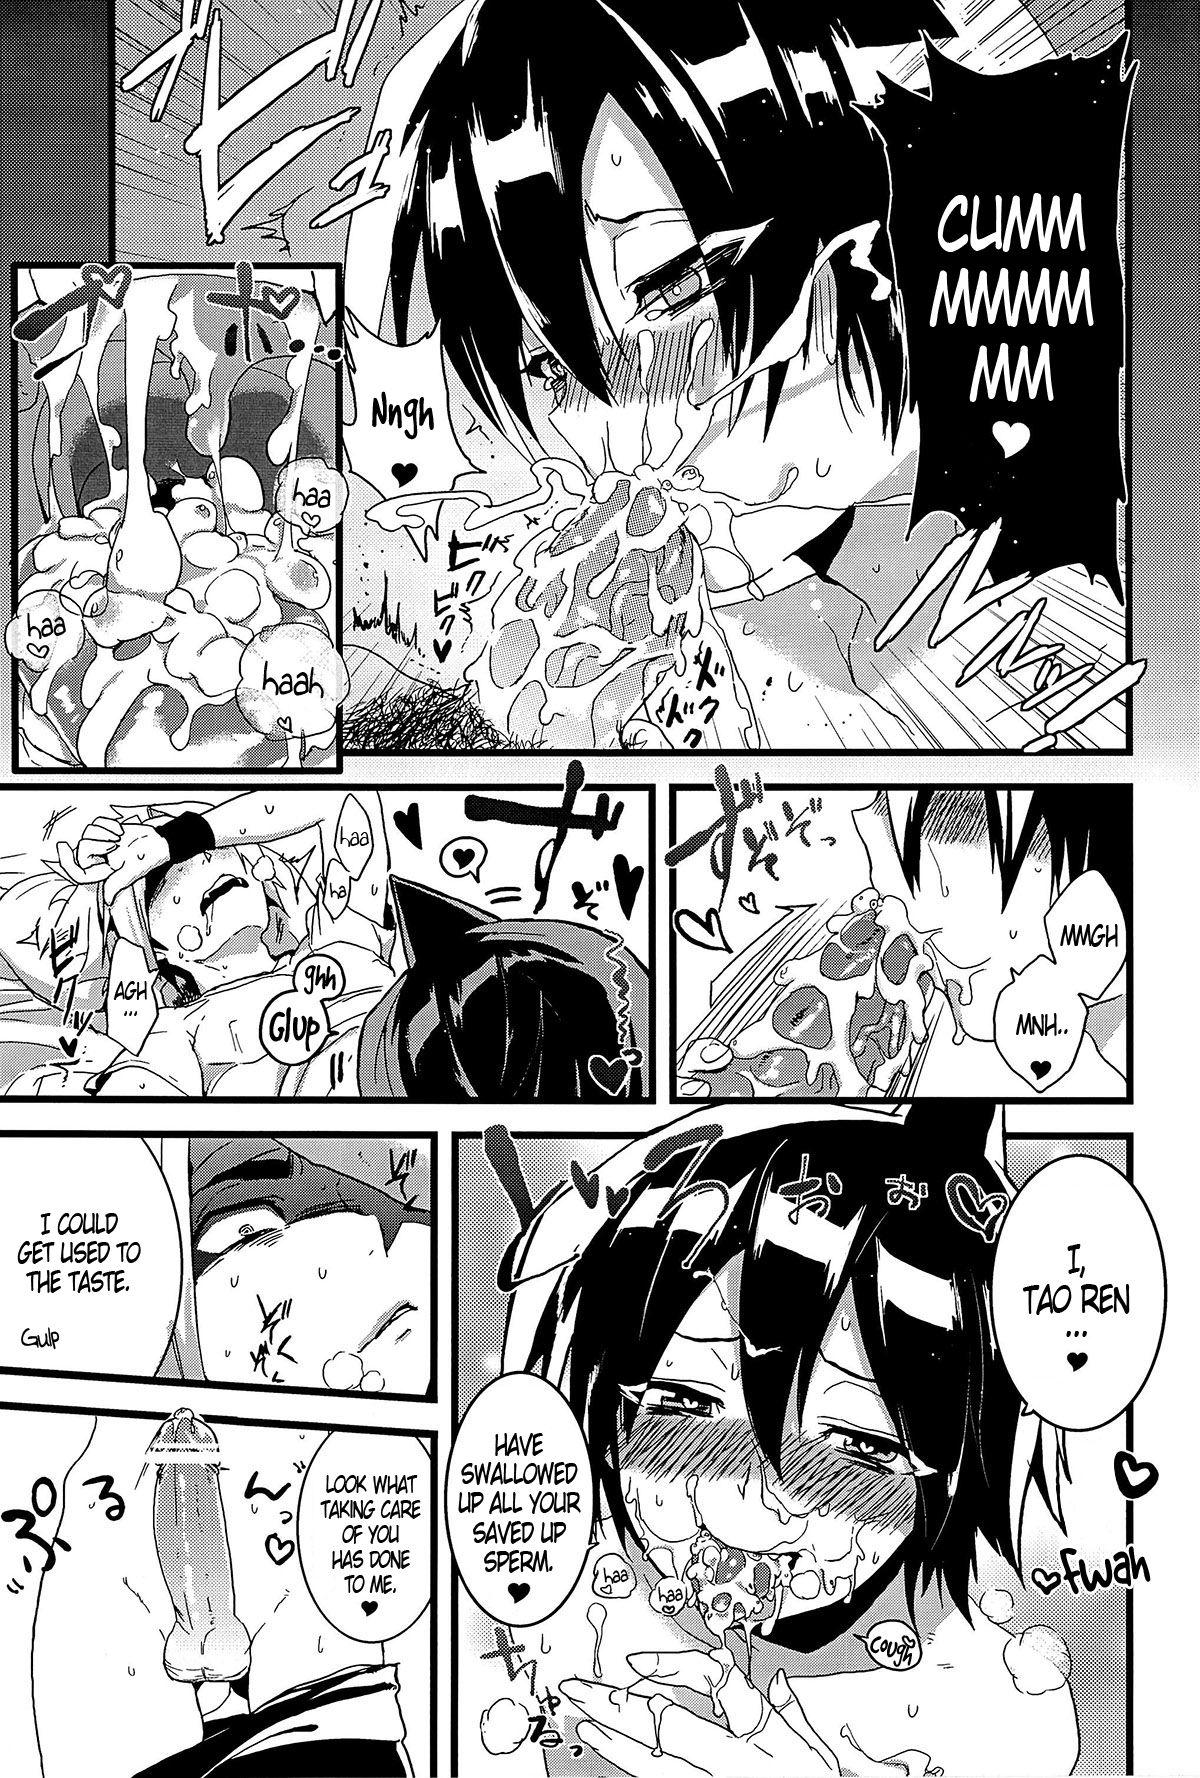 Spooning Kisama no Hajimete Ore no Mono! | Your First Time Is Mine! - Shaman king Pussy Play - Page 7